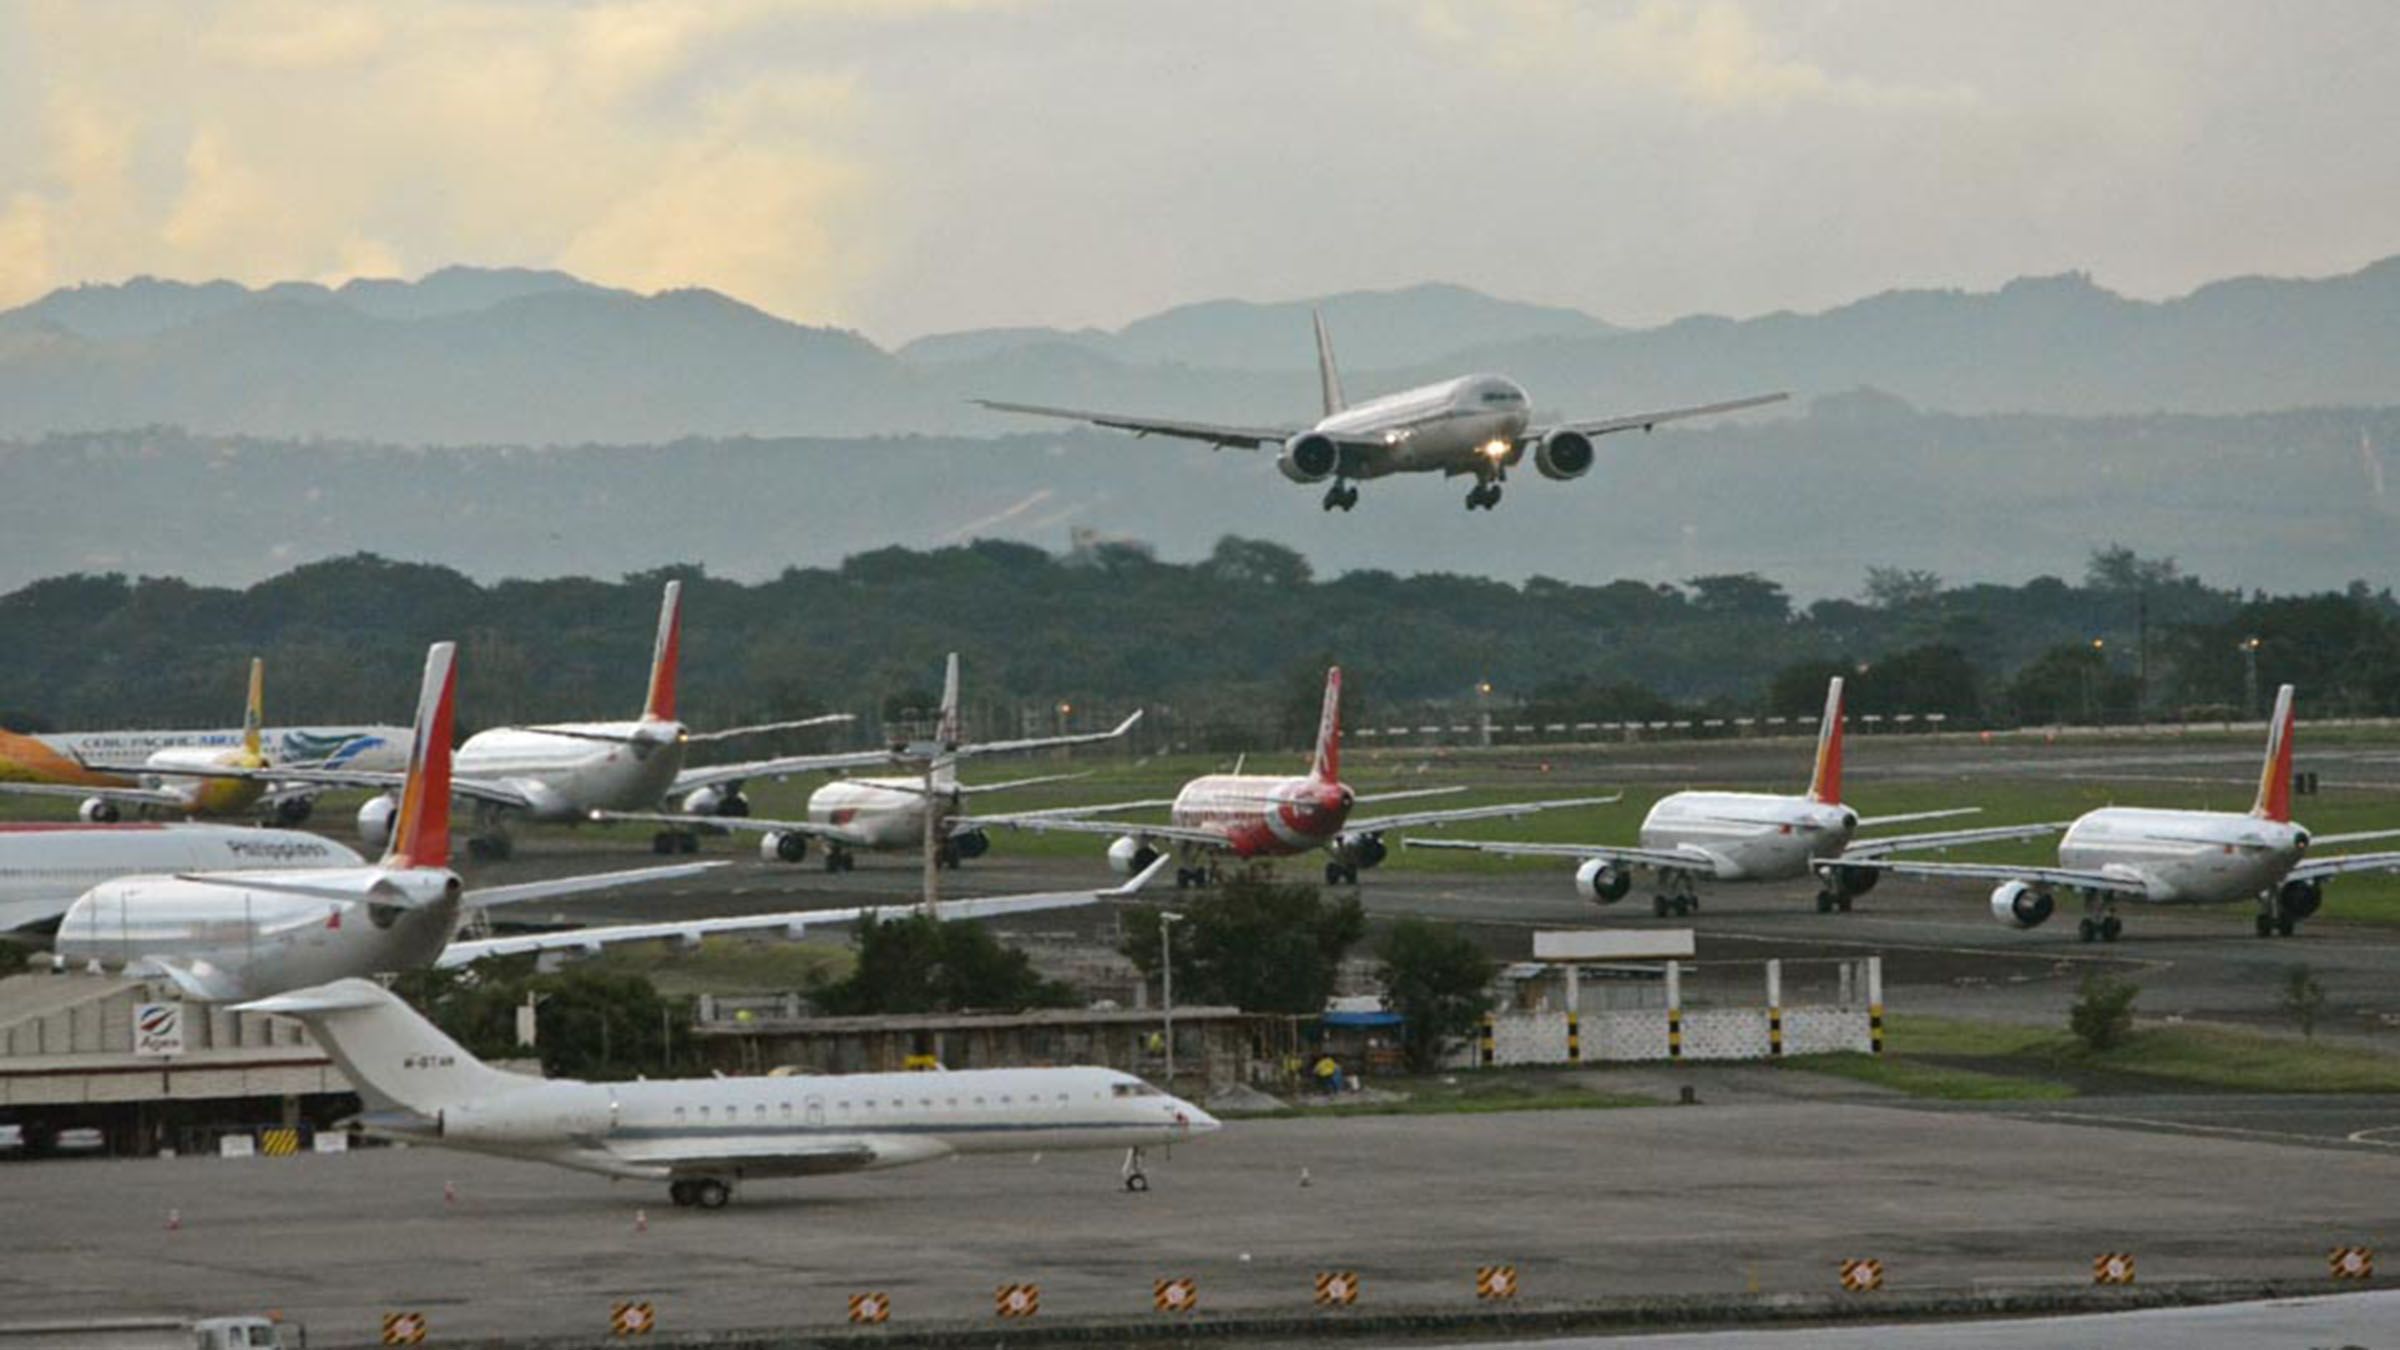 Plane fares to be lower in November with fuel surcharge reduction